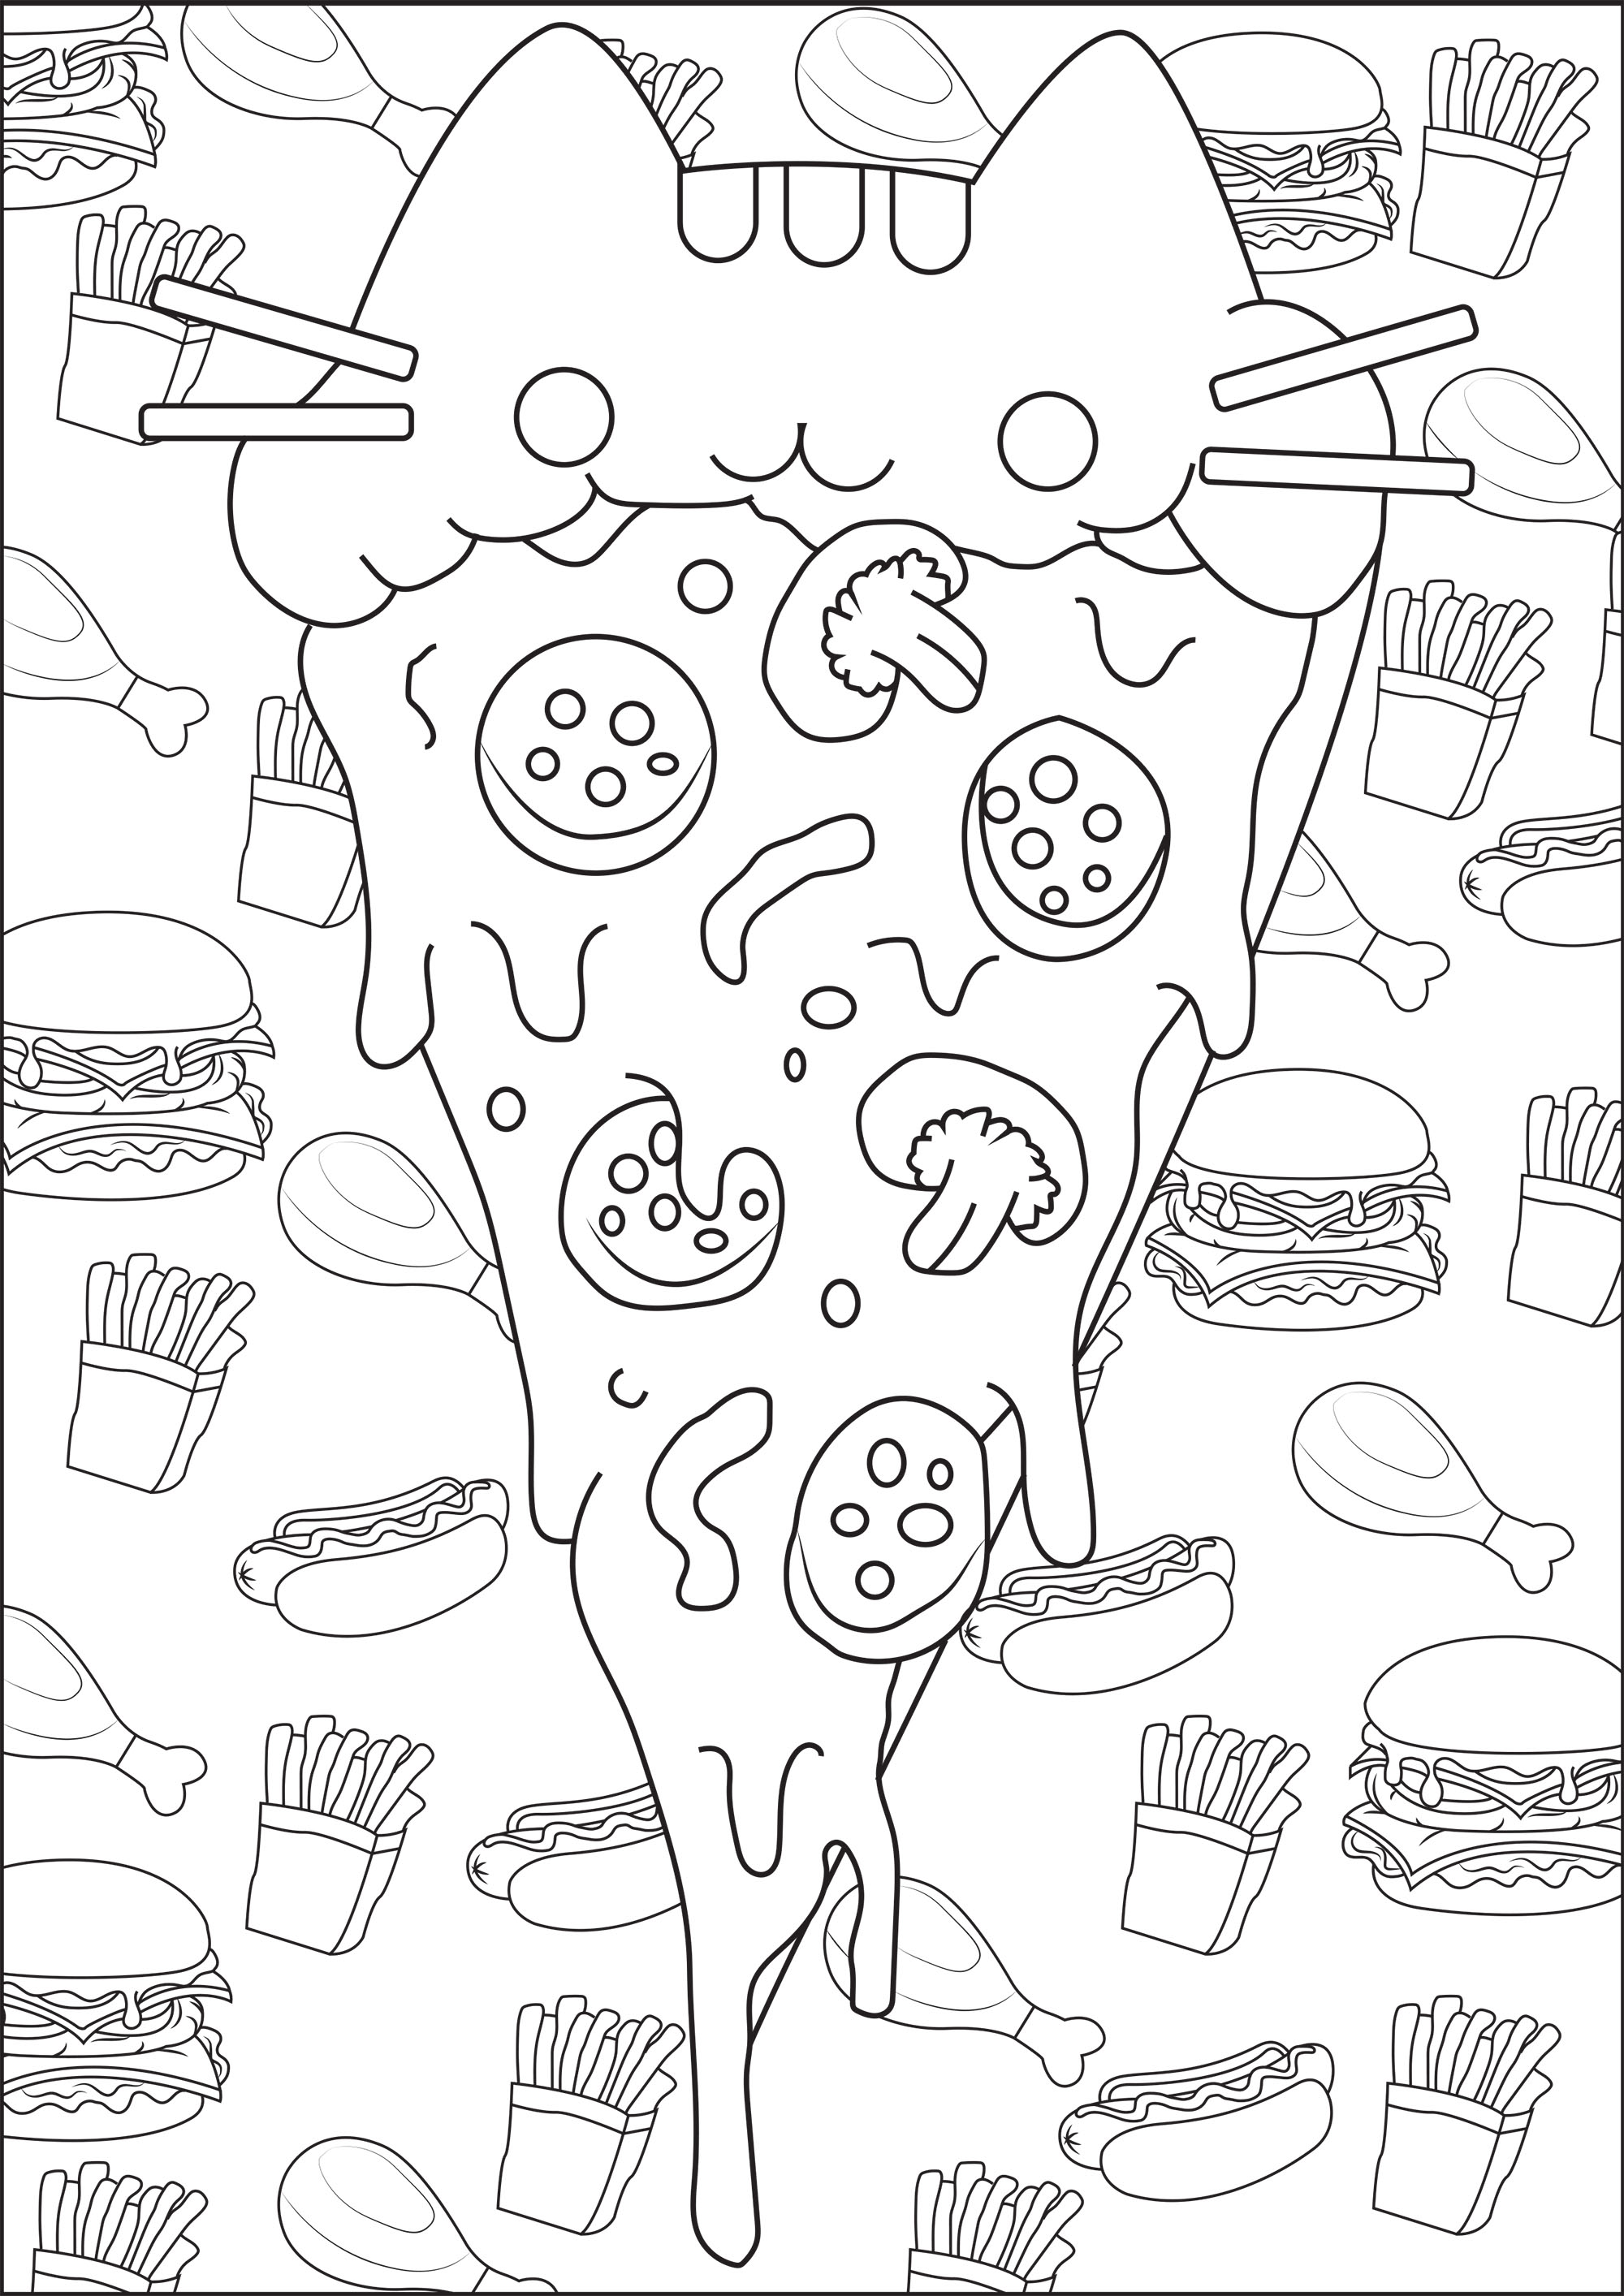 Color this Pusheen pizza, with a background full of junk food stuffs